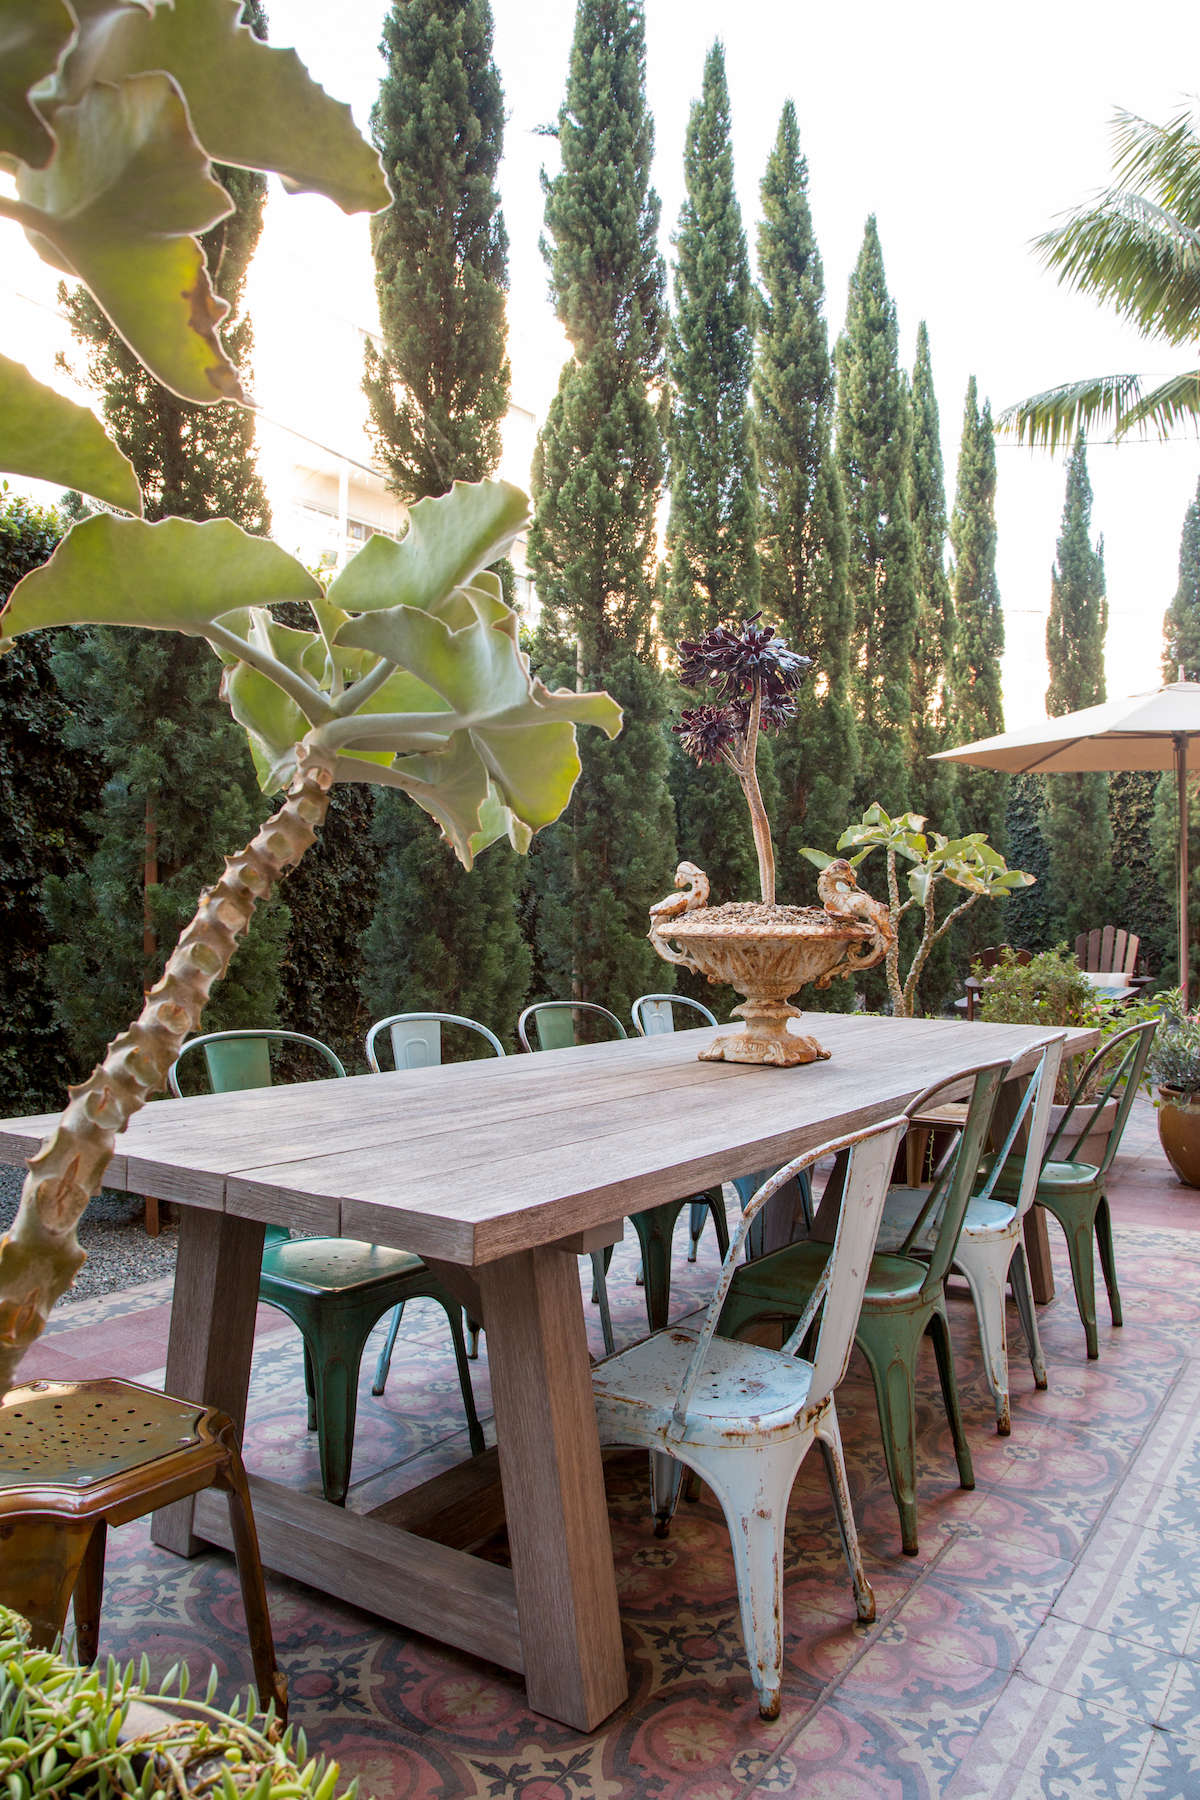 Metal Patio Furniture, Vintage Metal Table And Chairs Outdoor